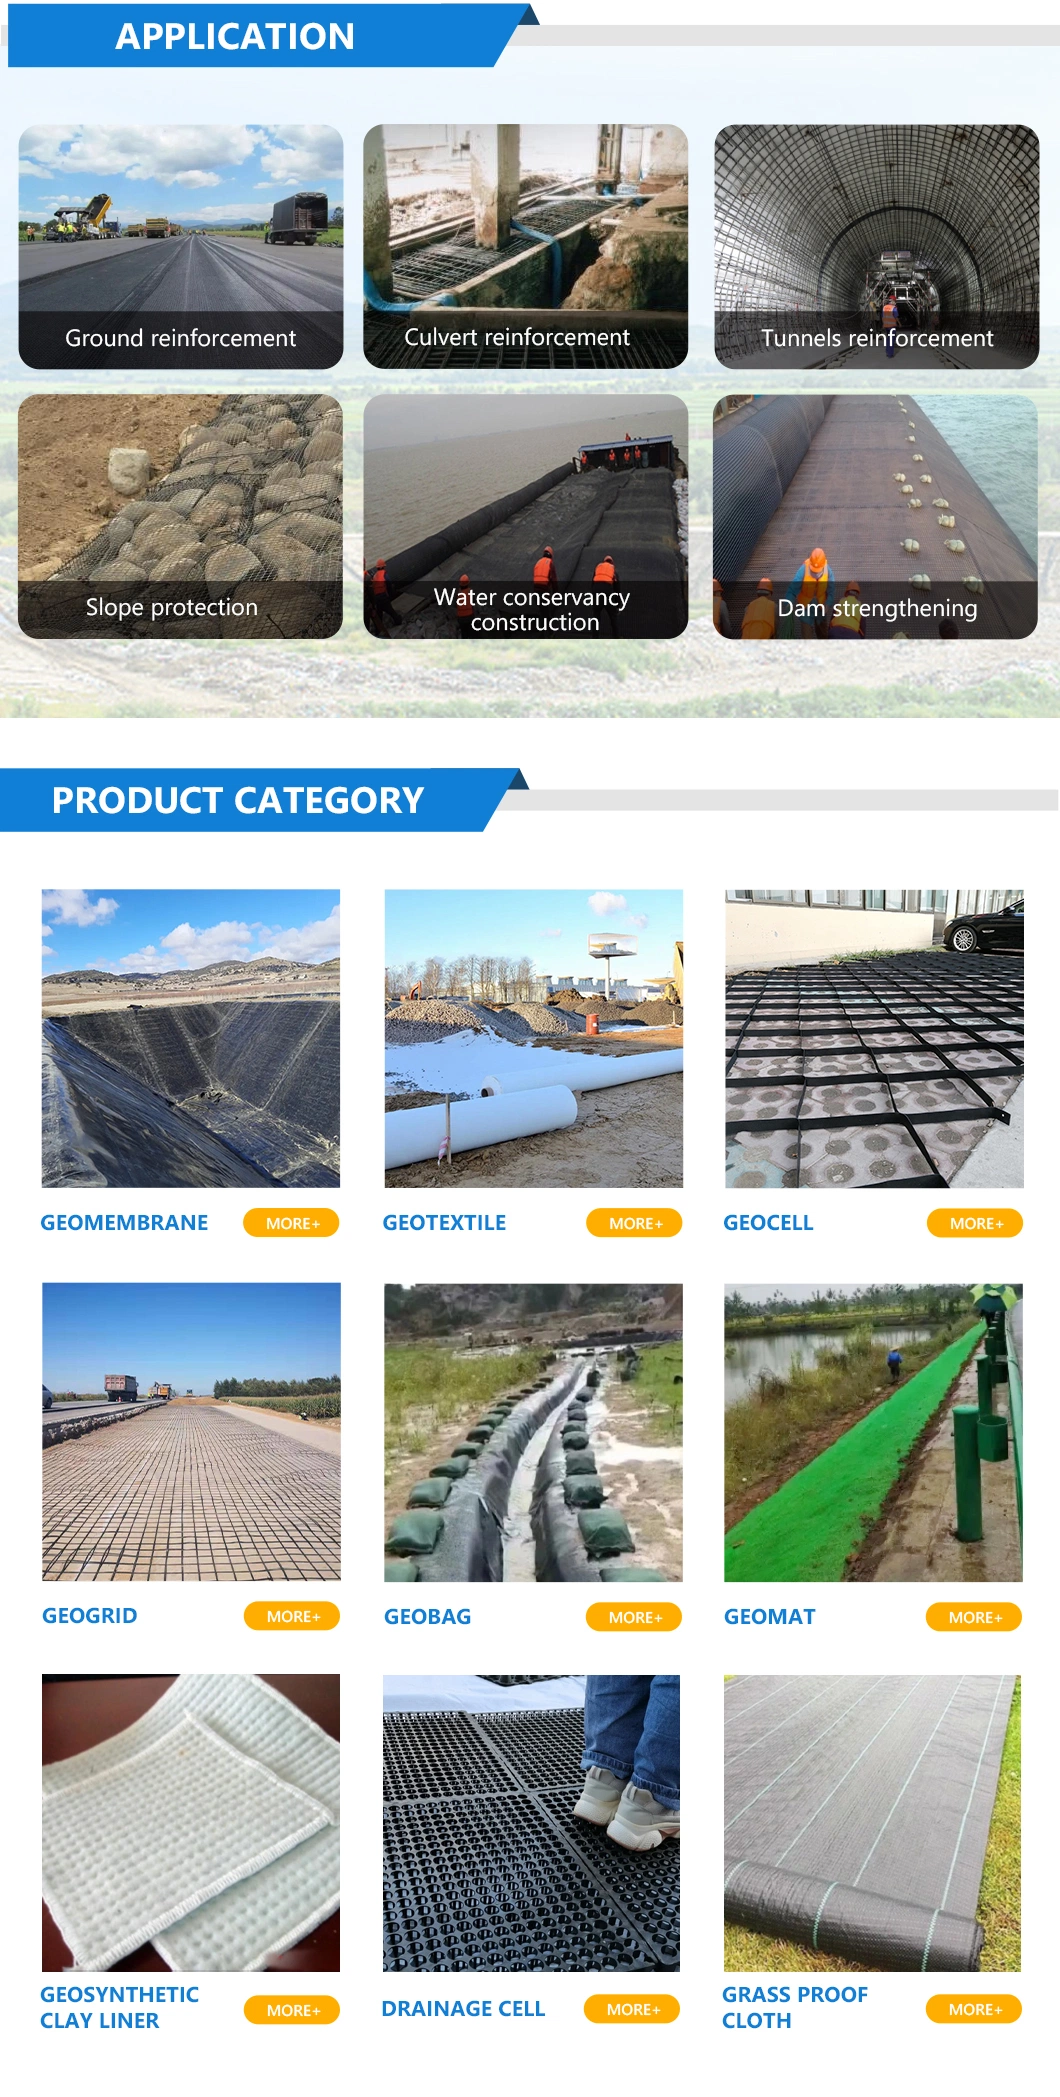 China Geogrid Manufacturer Fiberglass/Polyester Biaxial/PP Uniaxial/Plastic/Mining/Steel-Plastic Geogrid Manufacturer for Parking Lot and Wharf